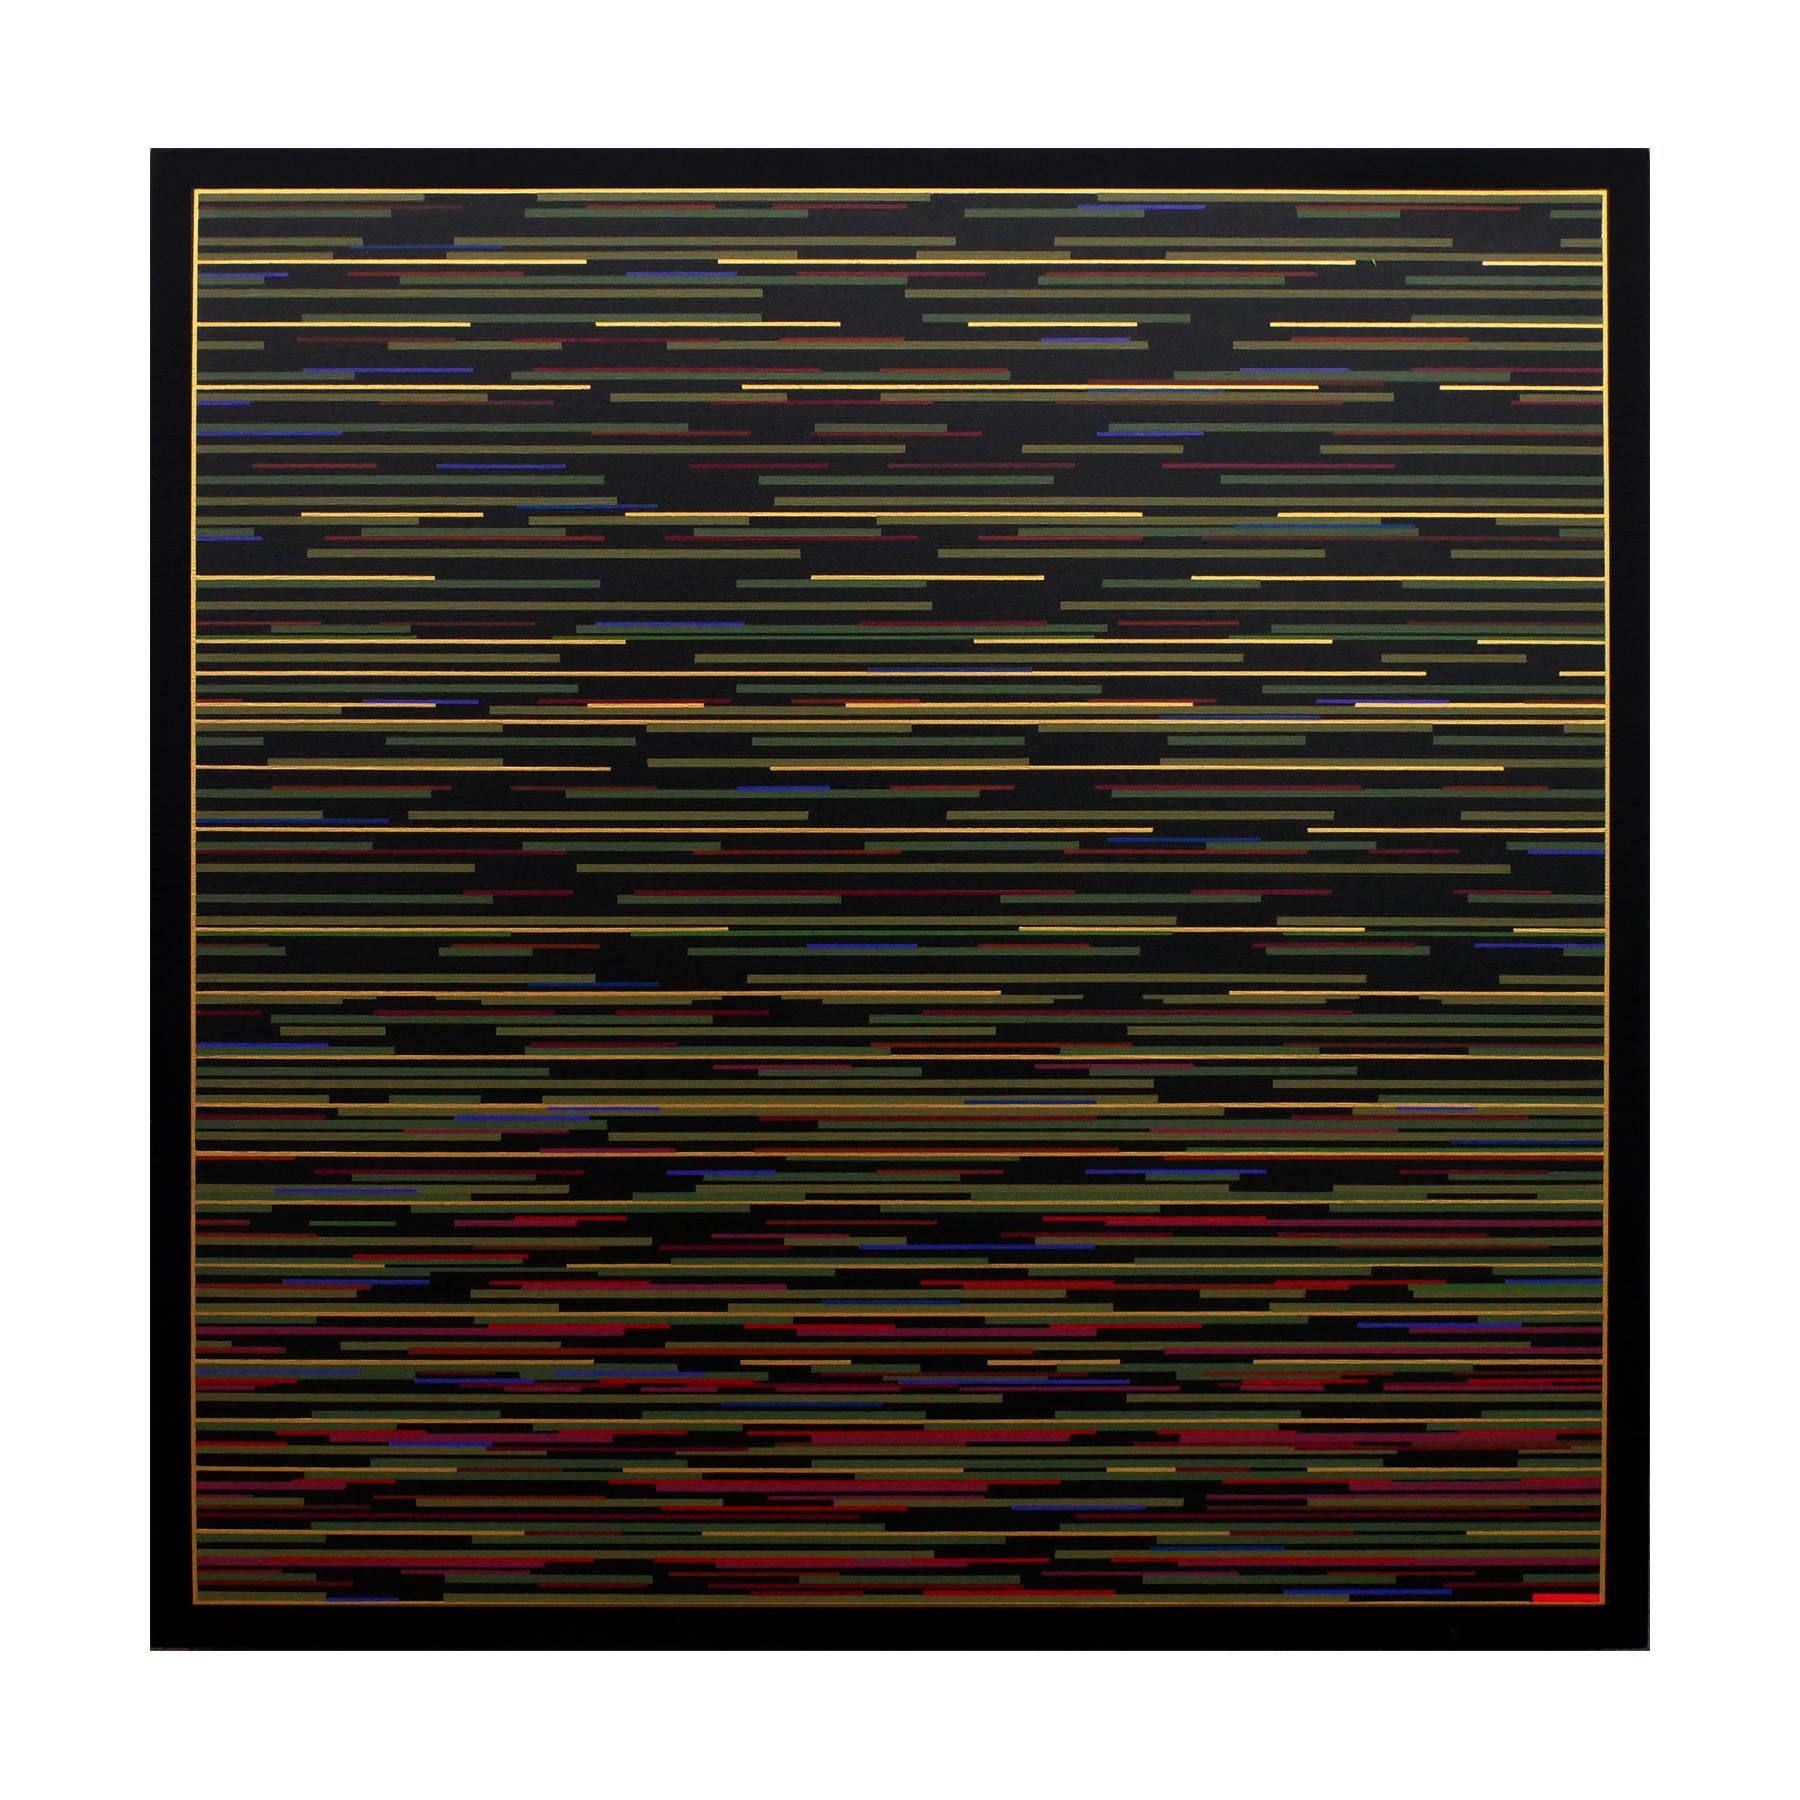 Contemporary abstract geometric painting by artist Mark Byckowski. The work is featured in a series of paintings. The work features horizontal lines with a variety of vivid colors of green, yellow, and blue against a black background. Each work in